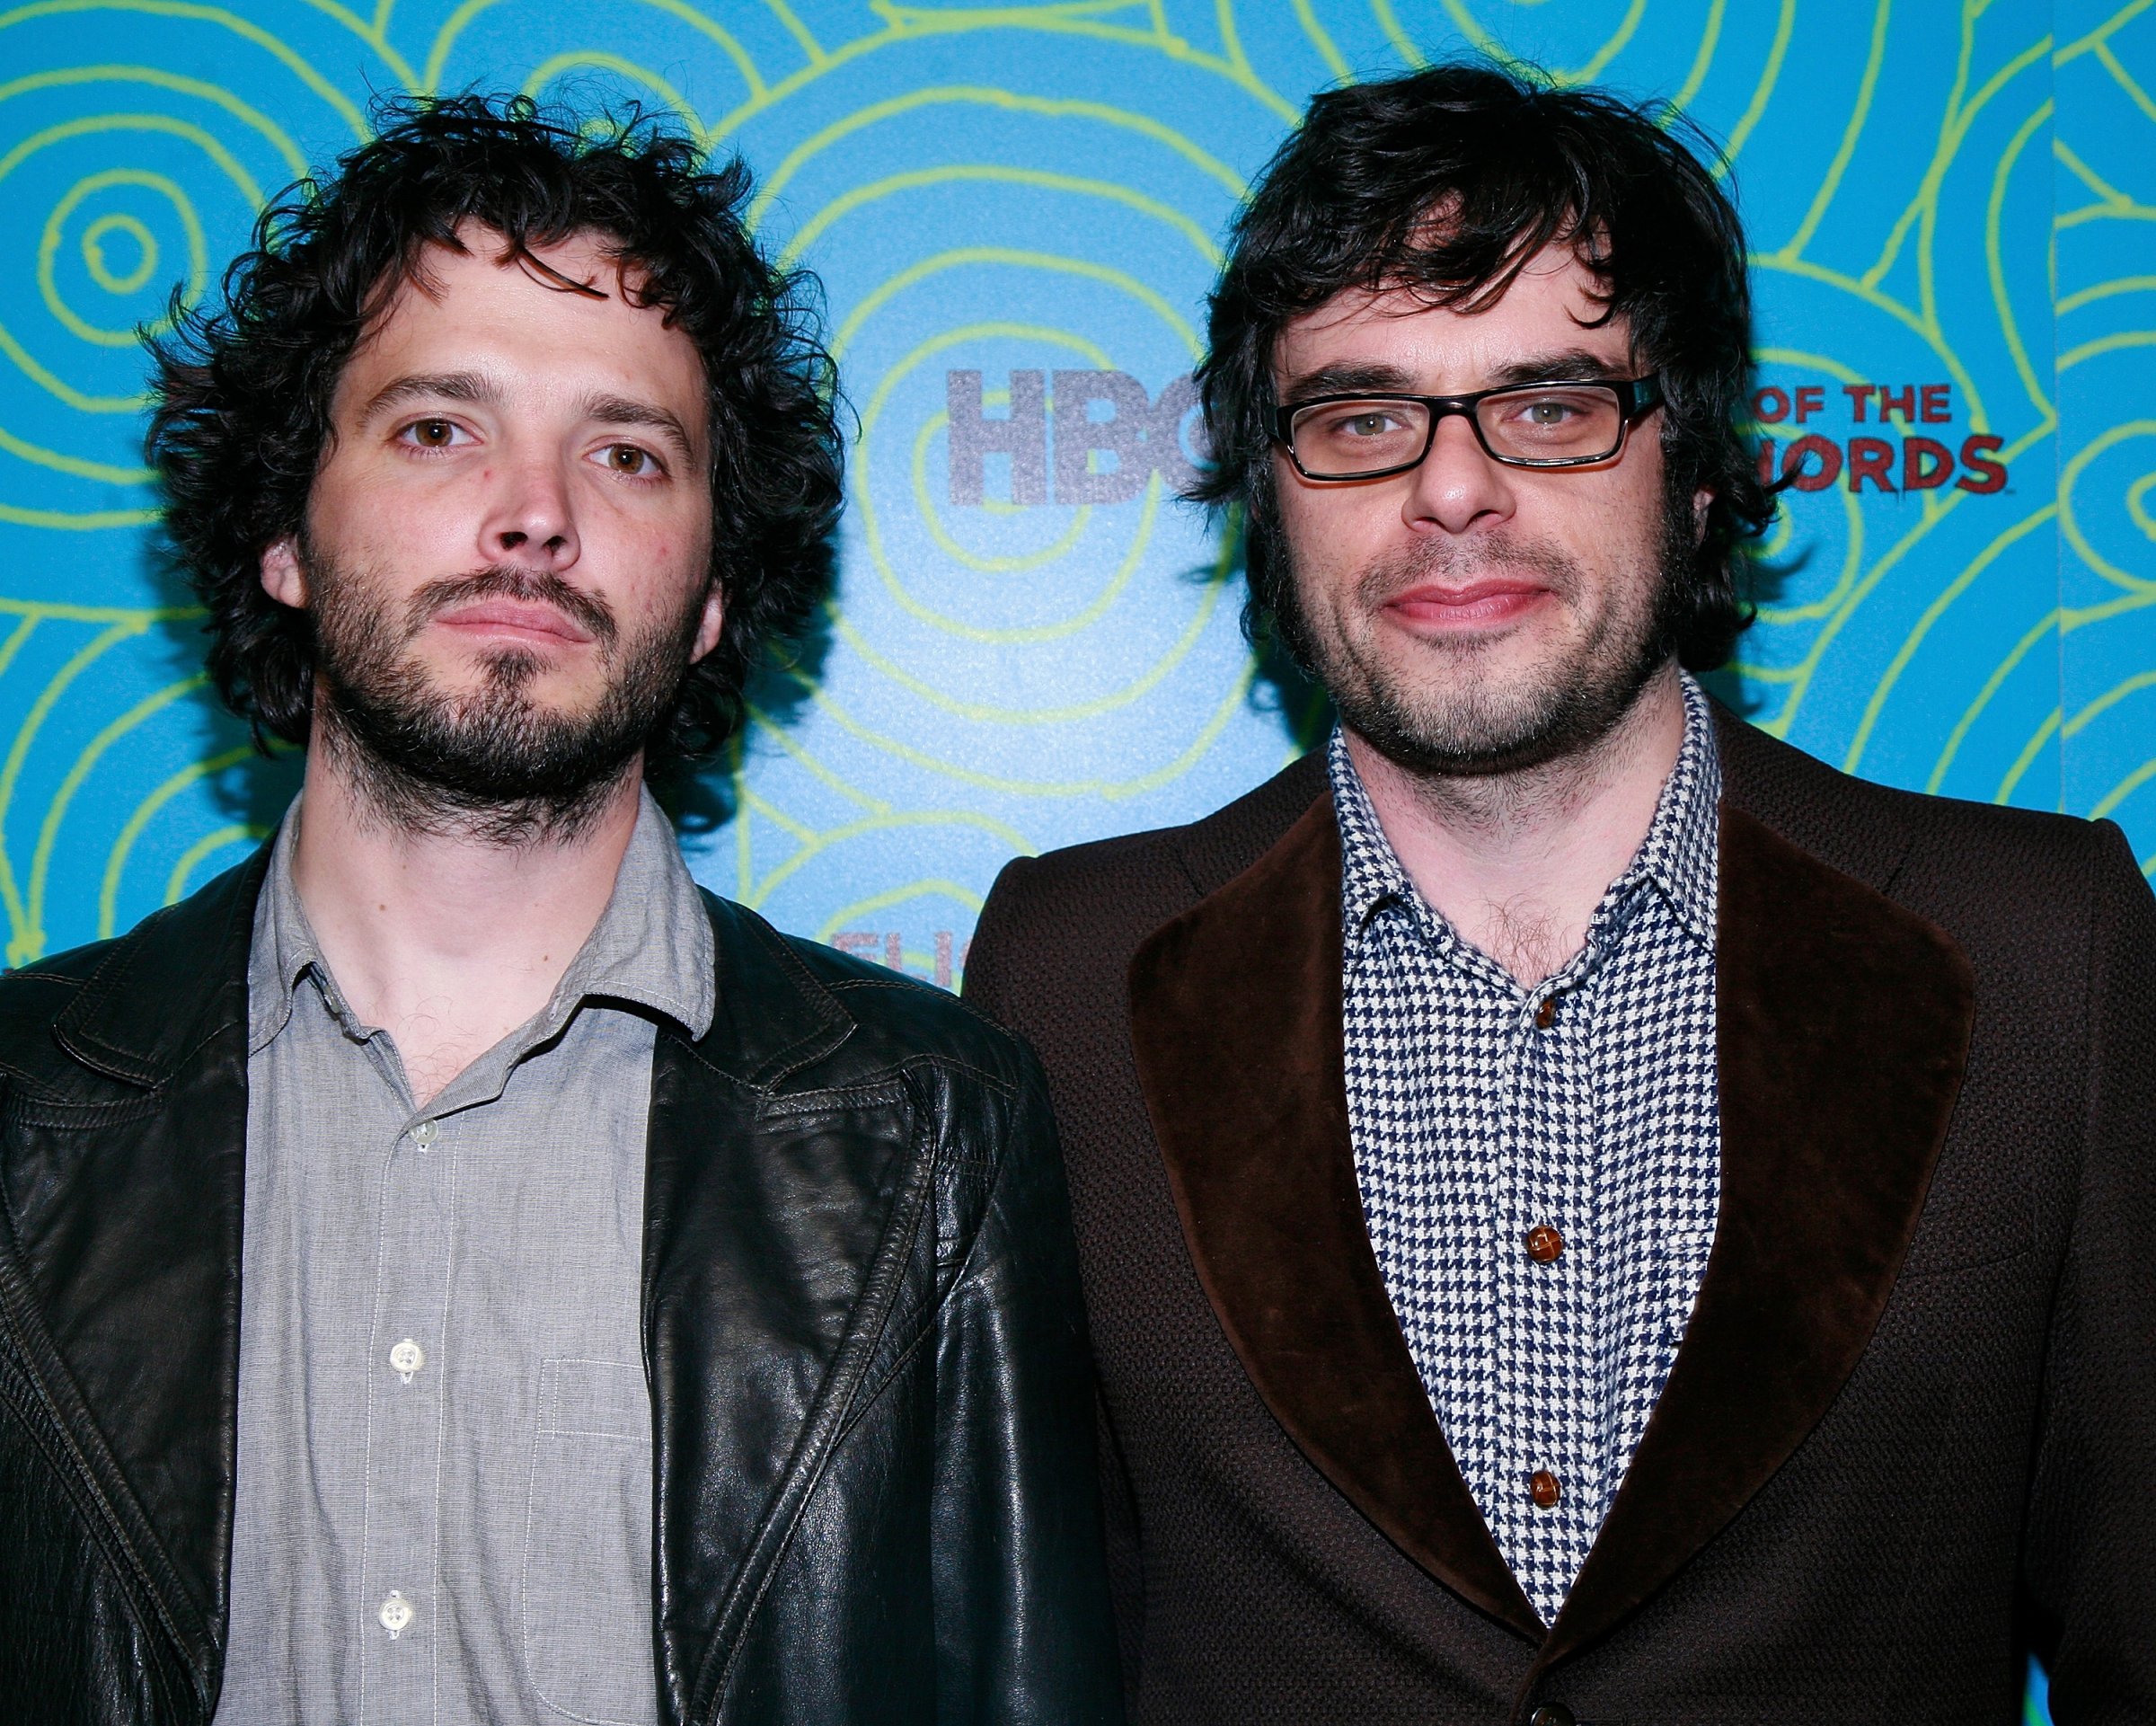 HBO Presents the 2nd Season Viewing Party of "Flight Of The Conchords"